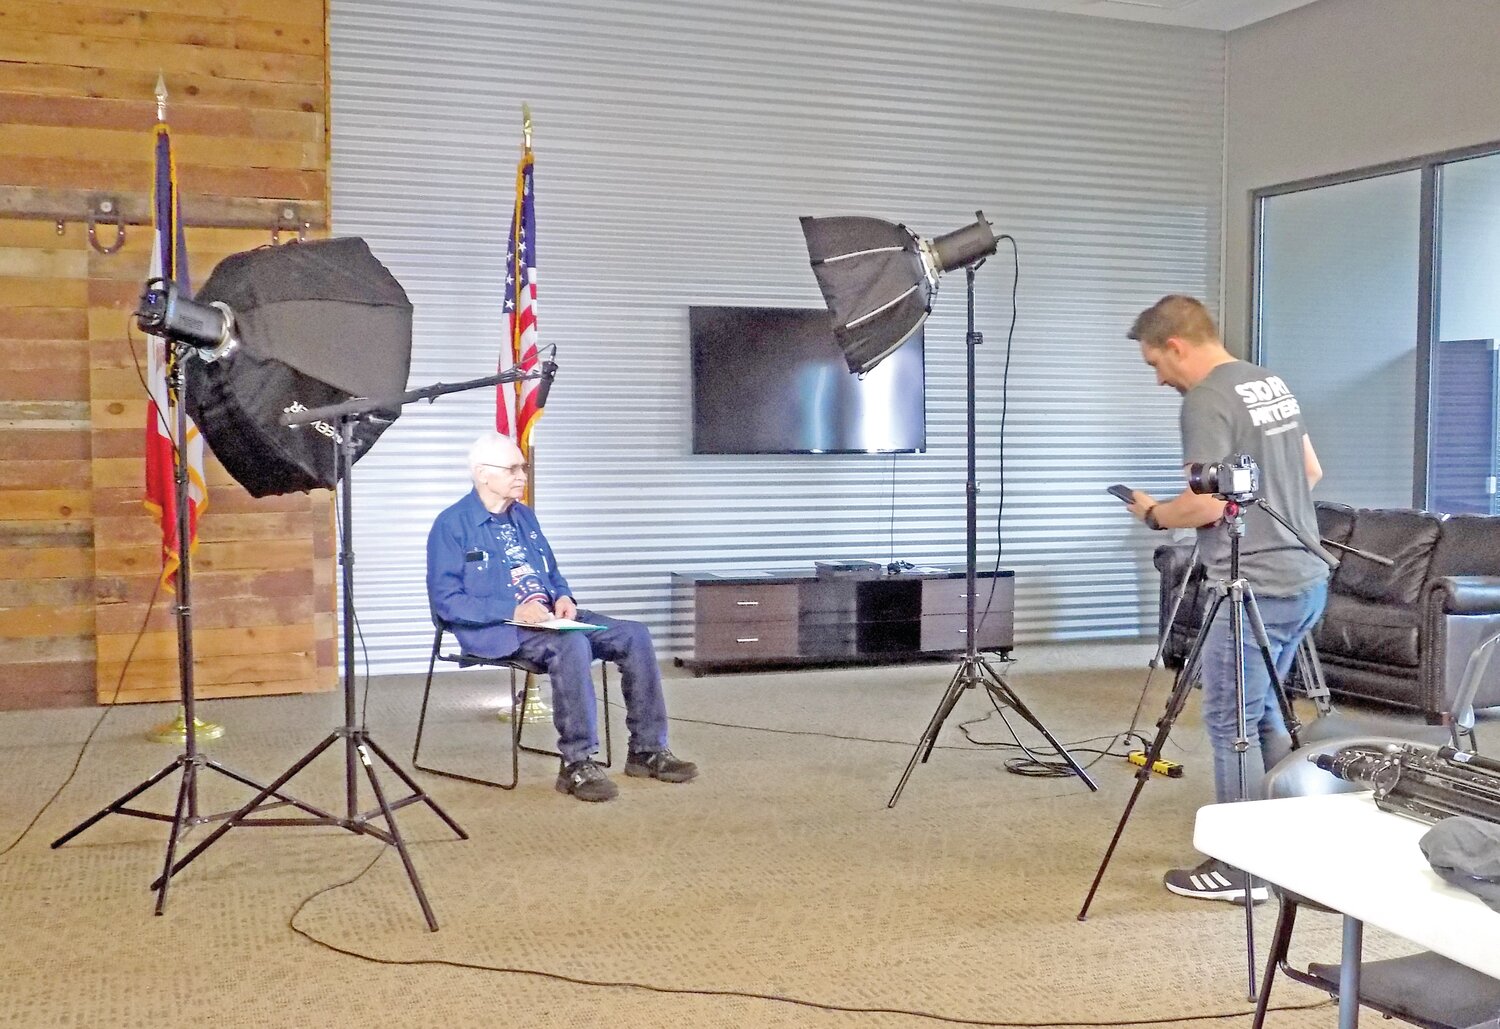 U.S. Air Force veteran Paul Christen, left, gets ready to answer John Choate’s questions before the cameras on May 19.